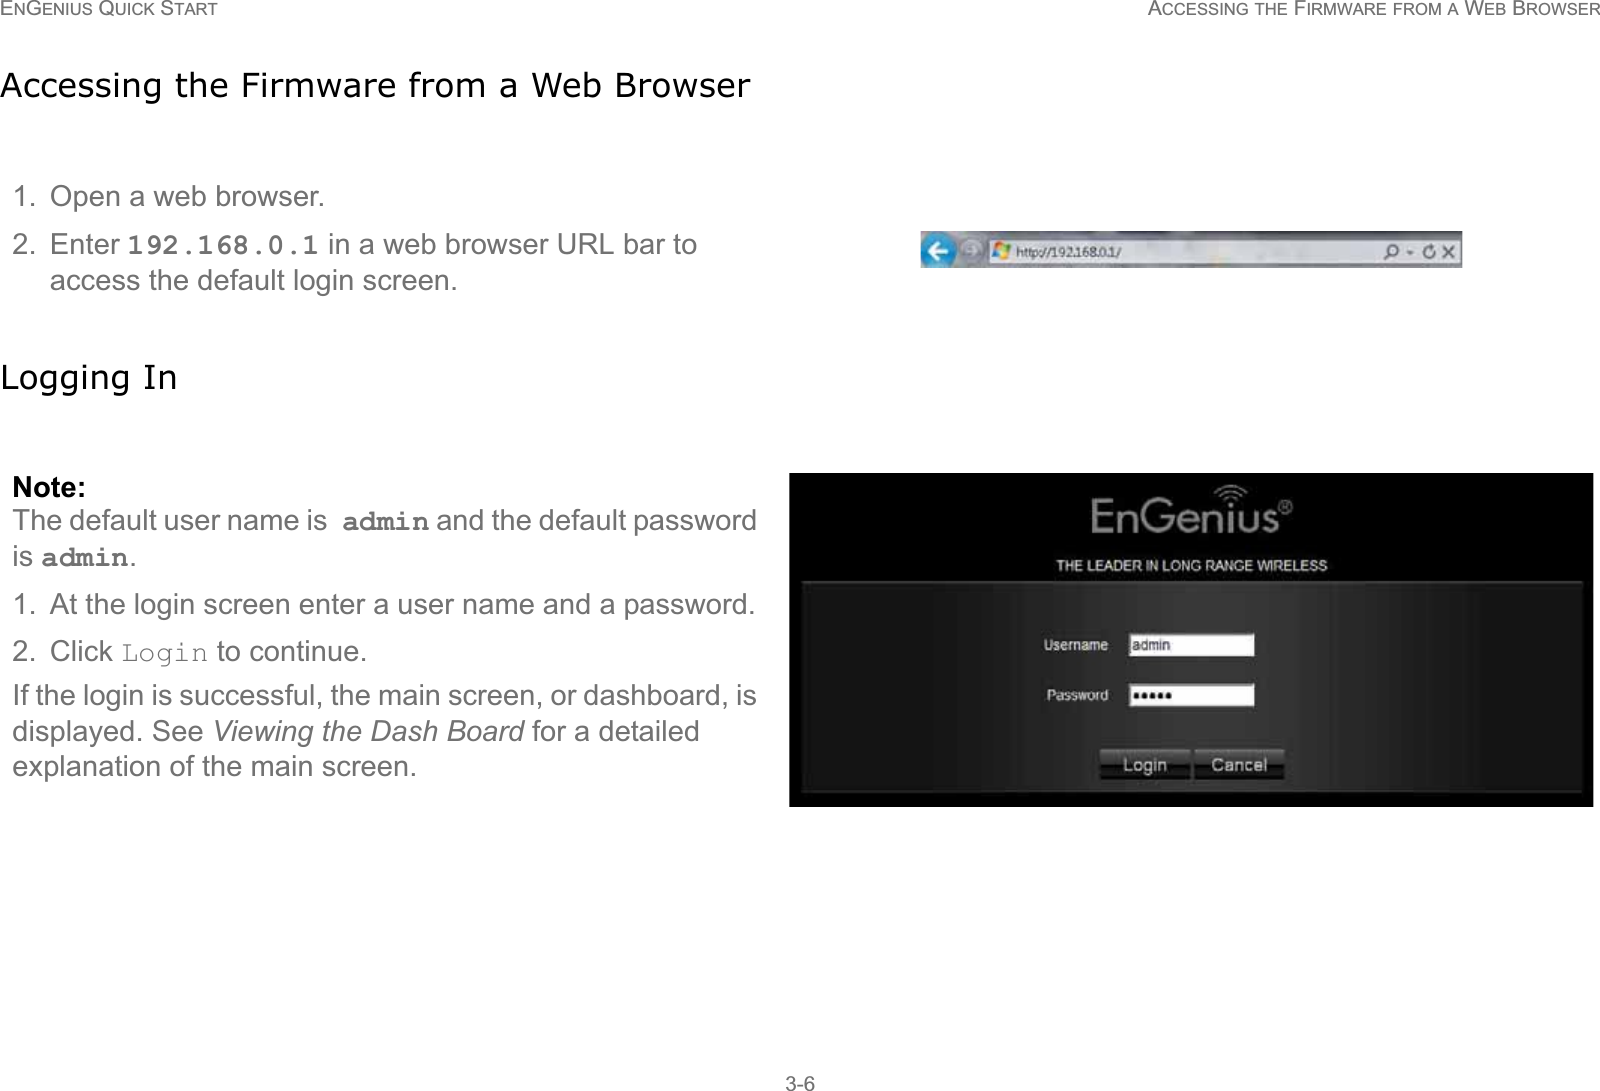 ENGENIUS QUICK START ACCESSING THE FIRMWARE FROM A WEB BROWSER3-6Accessing the Firmware from a Web BrowserLogging In1. Open a web browser.2. Enter 192.168.0.1 in a web browser URL bar to access the default login screen.Note:The default user name is admin and the default password is admin.1. At the login screen enter a user name and a password. 2. Click Login to continue.If the login is successful, the main screen, or dashboard, is displayed. See Viewing the Dash Board for a detailed explanation of the main screen.